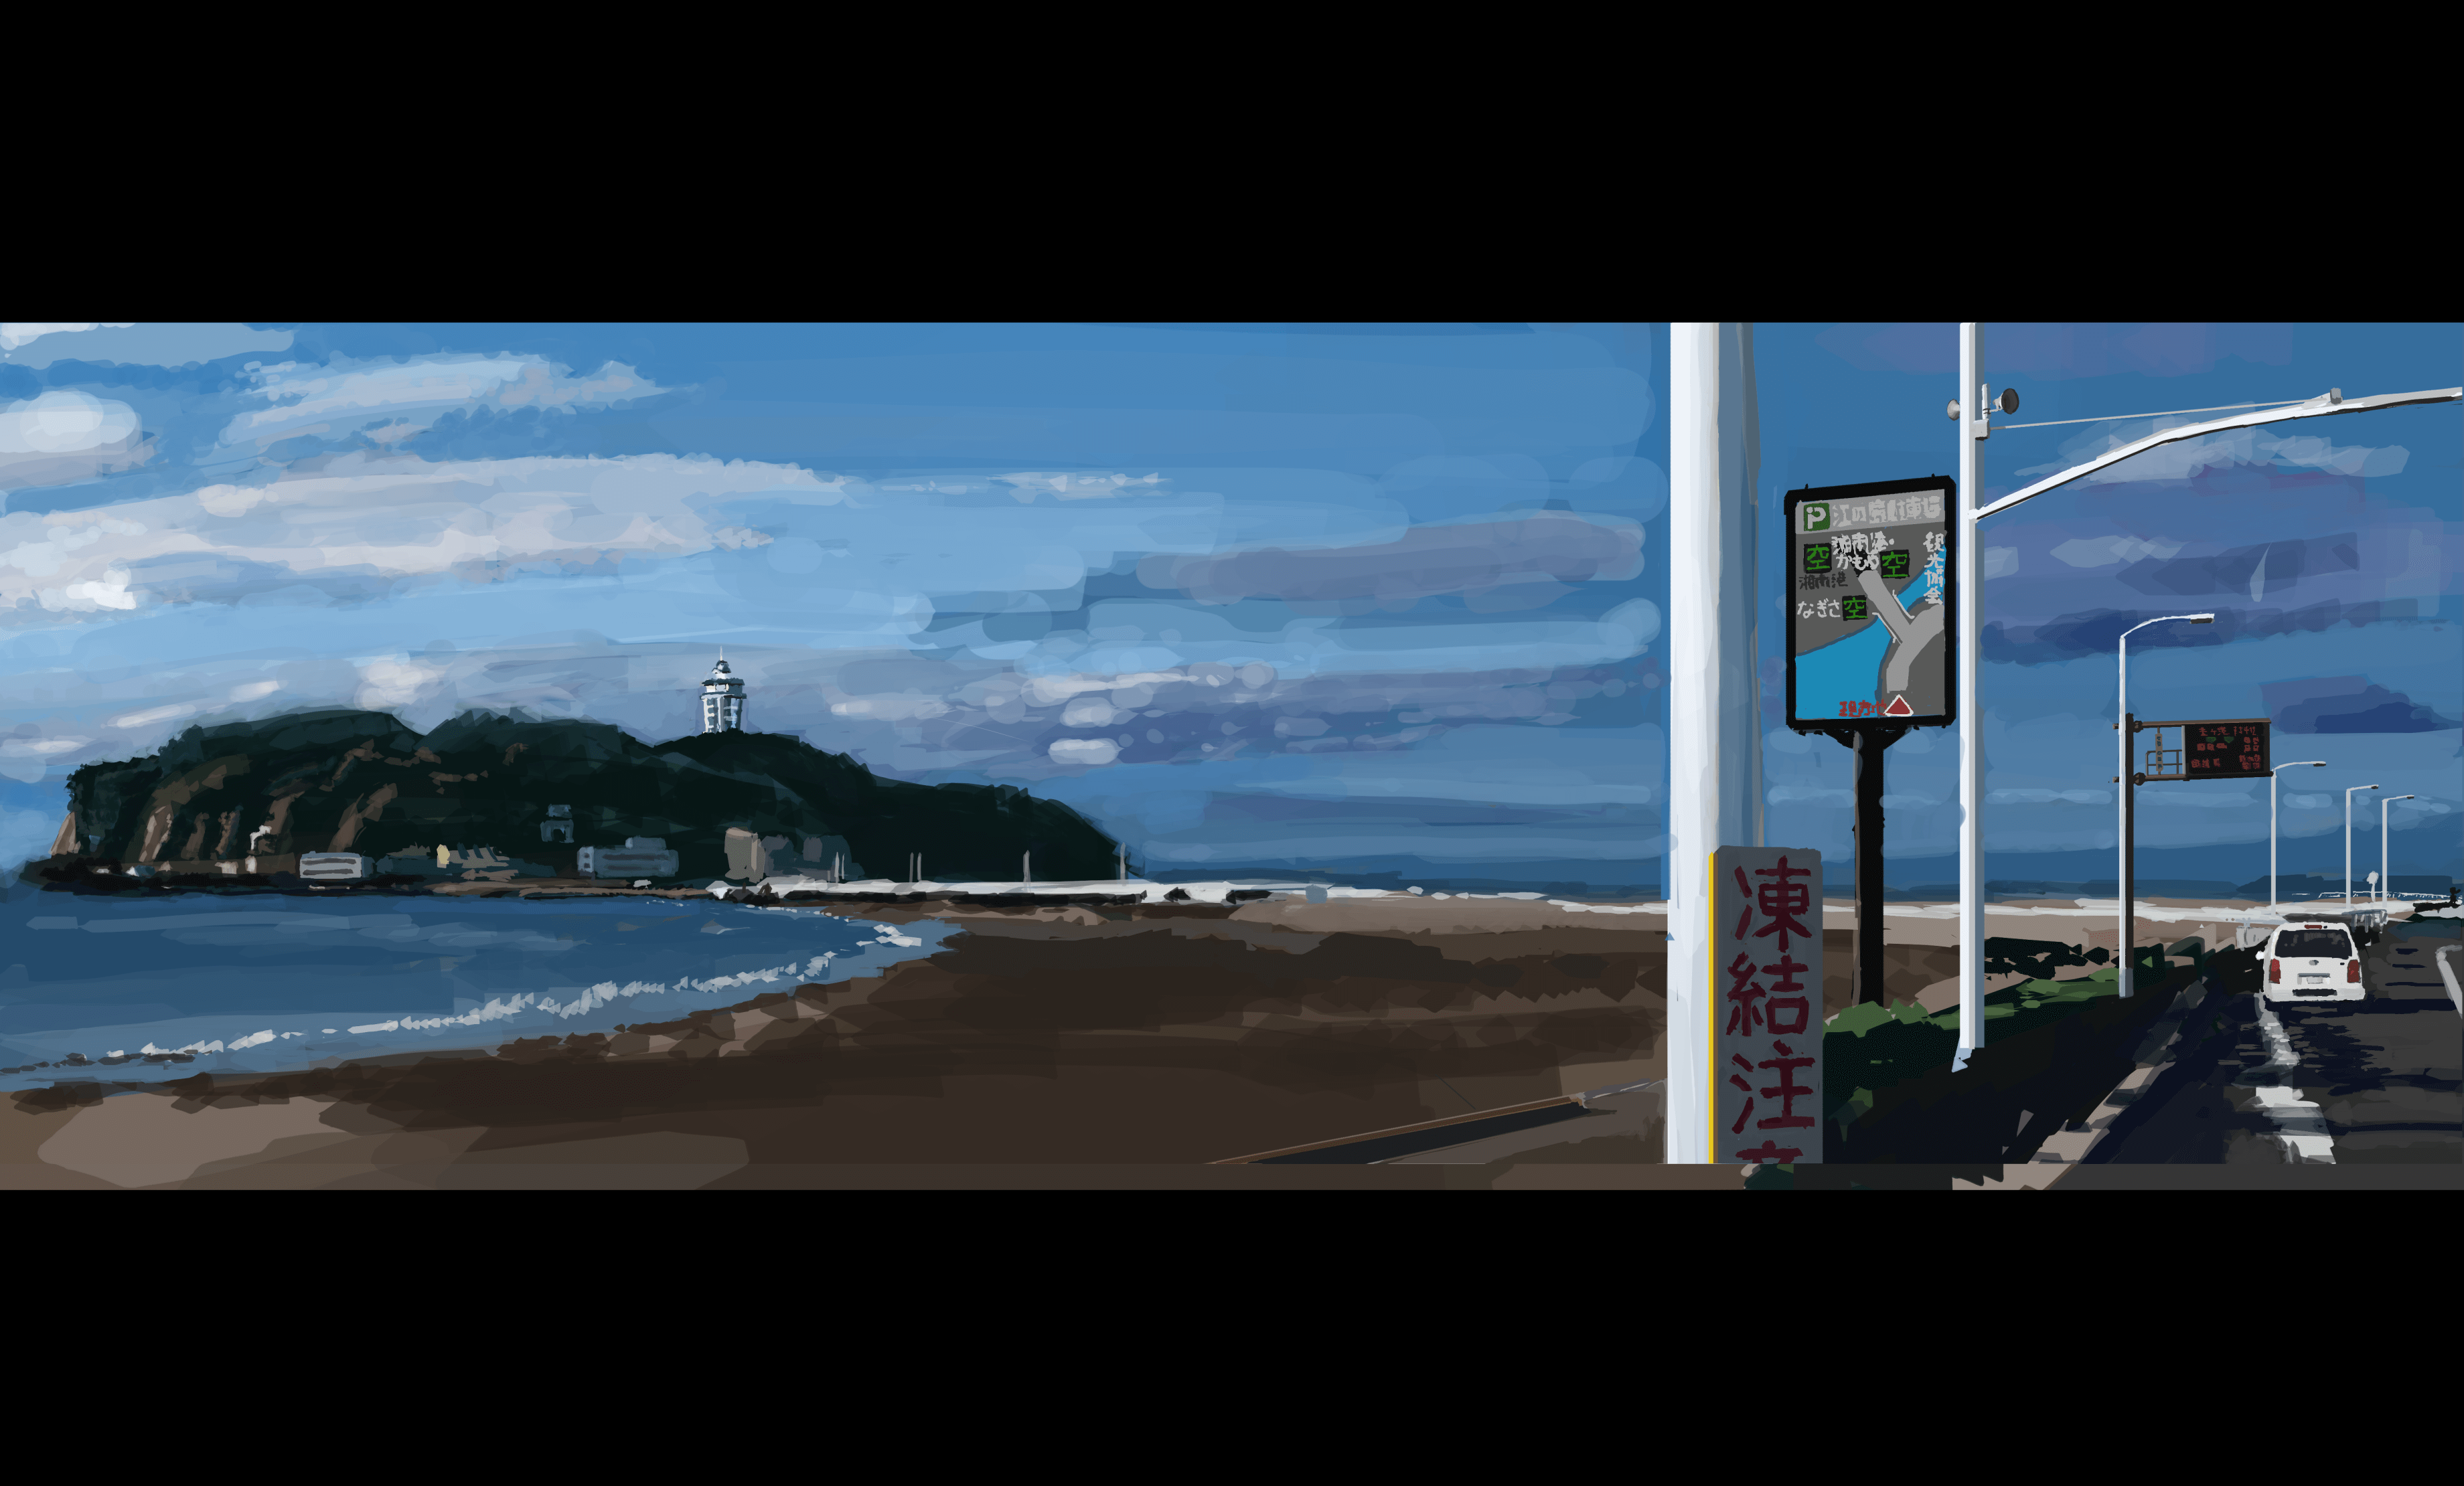 images/others/sketch/2022_08_21-enoshima.png